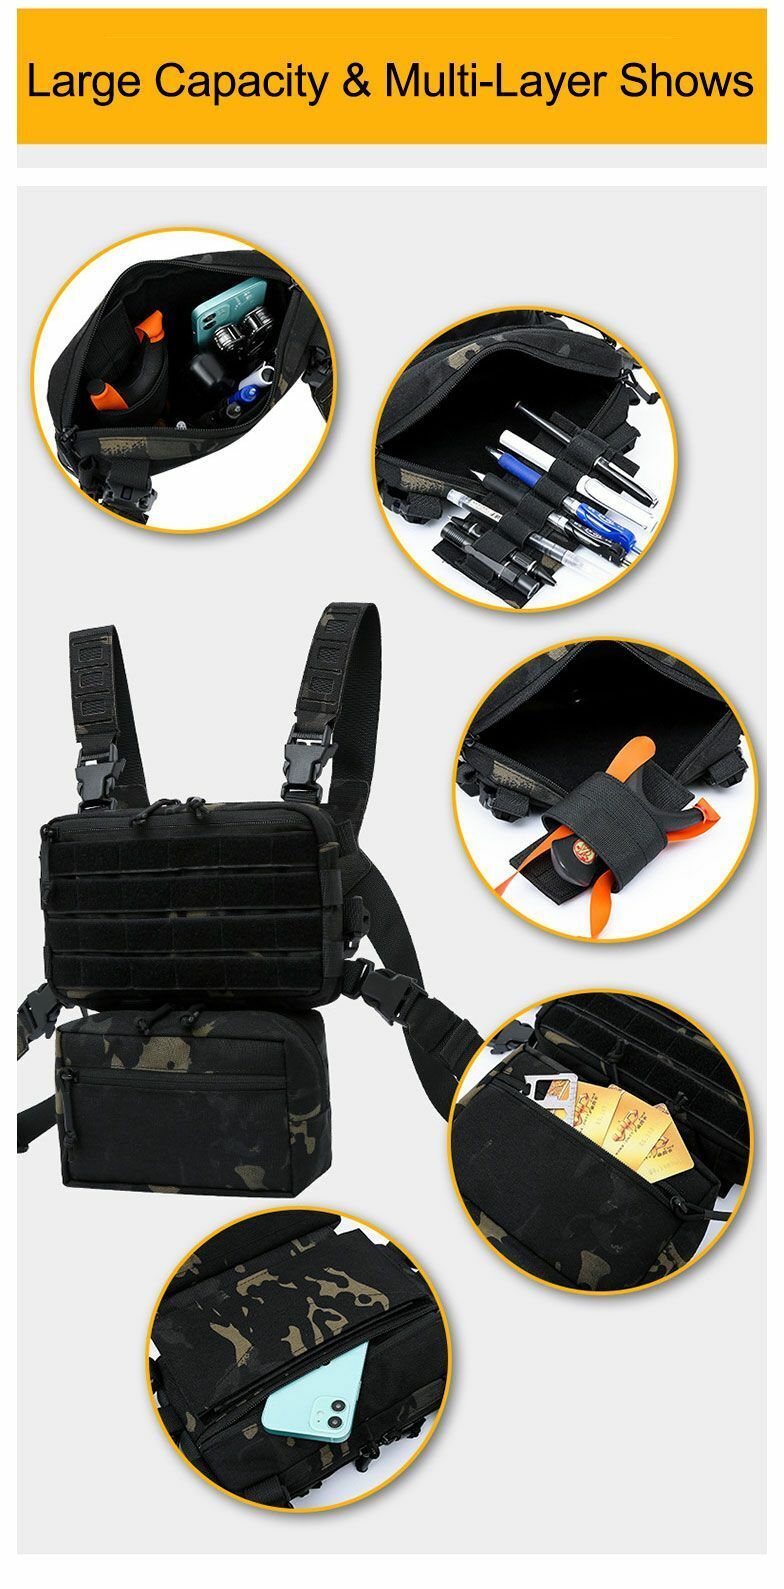 Outdoor Tactical Vest Bag CS Wargame Military Chest Airsoft Pouch Holster  Molle